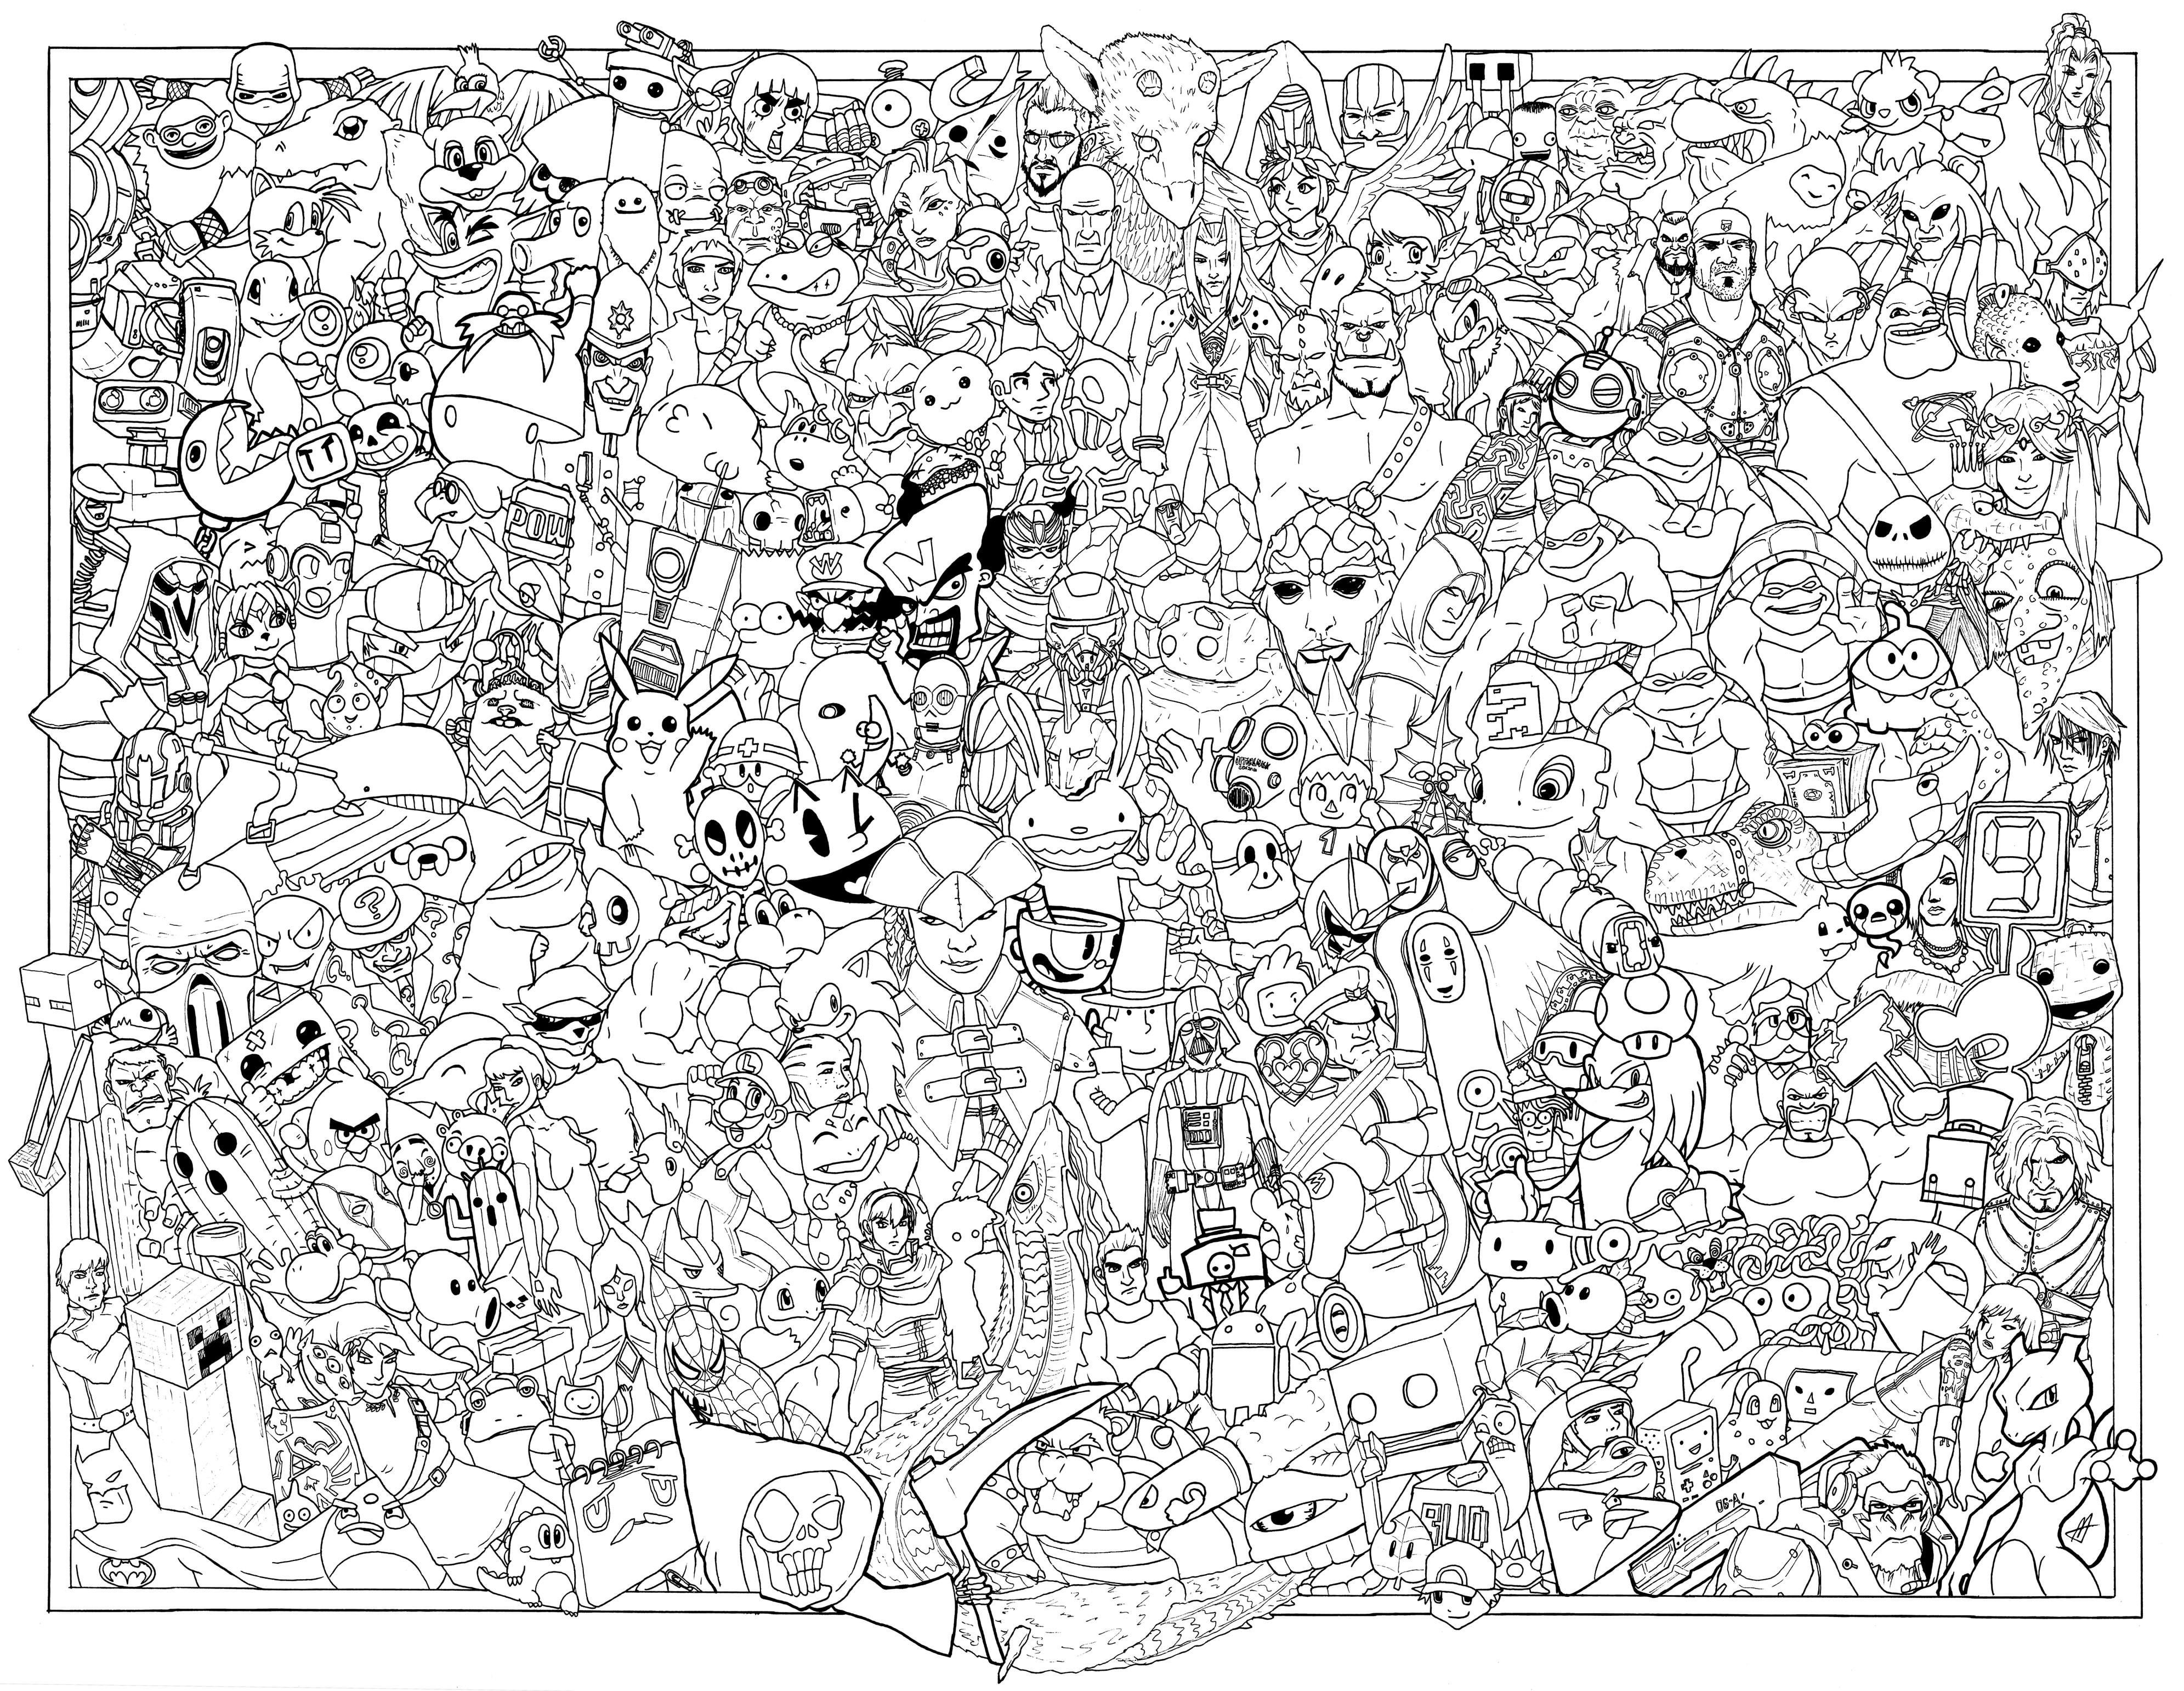 I spent way too much time making this coloring poster that has hidden gaming logos in it if you color it properly rgaming